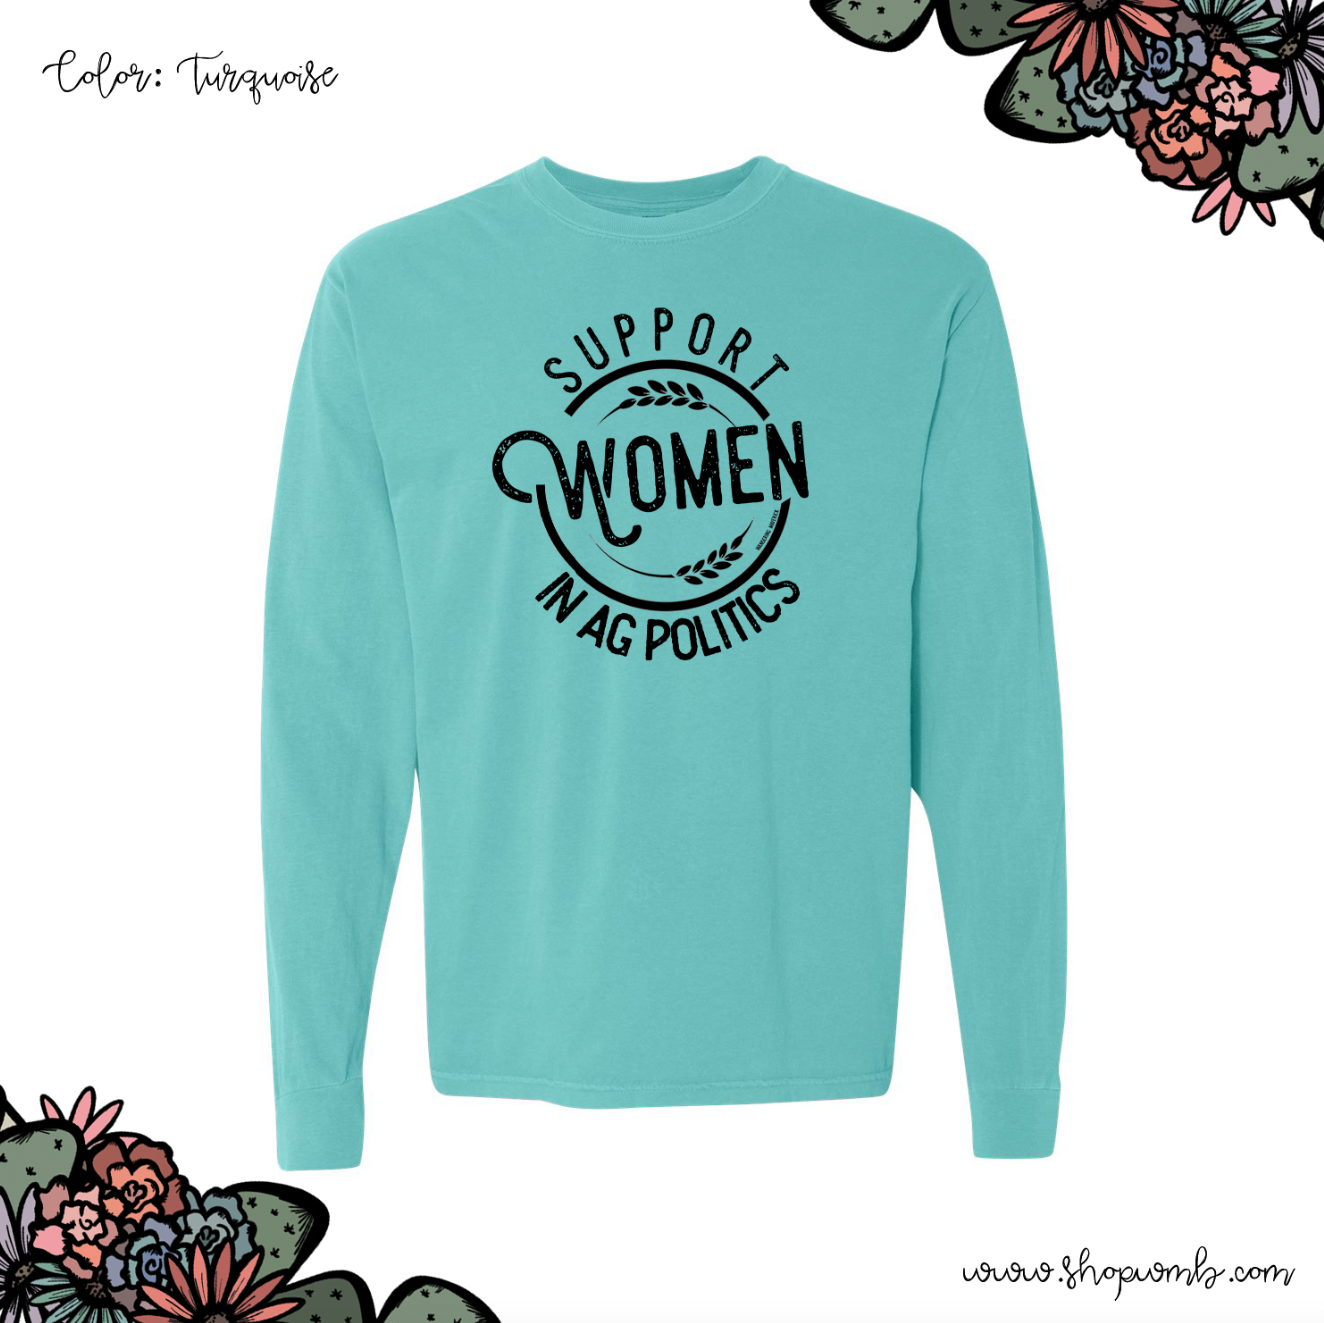 Support Women In Ag Politics LONG SLEEVE T-Shirt (S-3XL) - Multiple Colors!